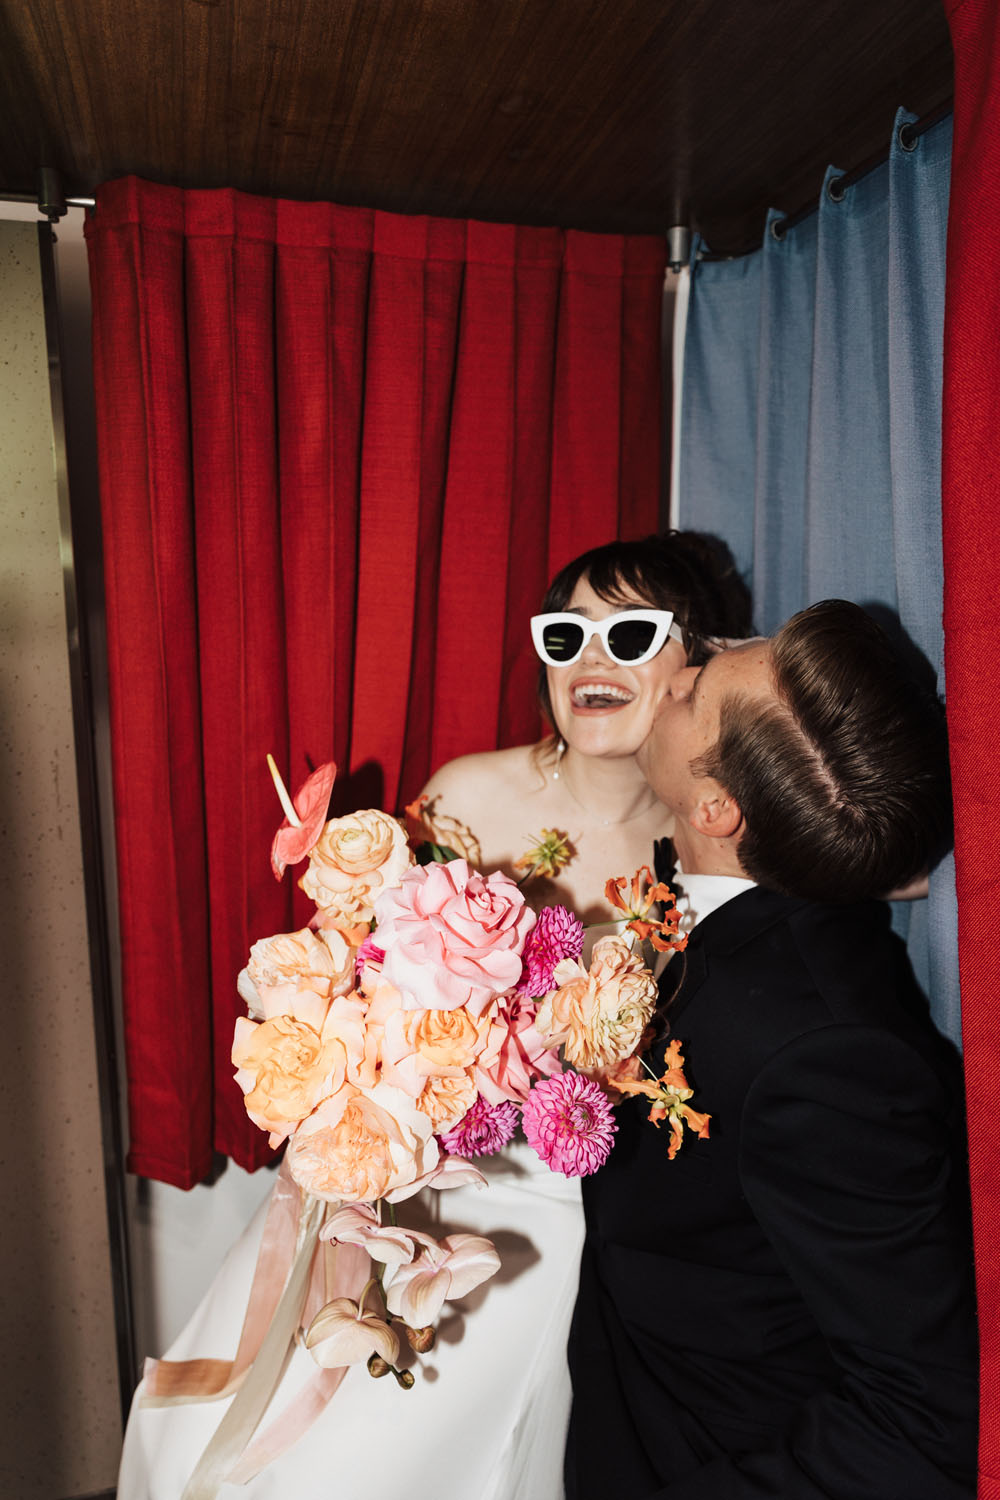 vintage photo booth photos for wedding